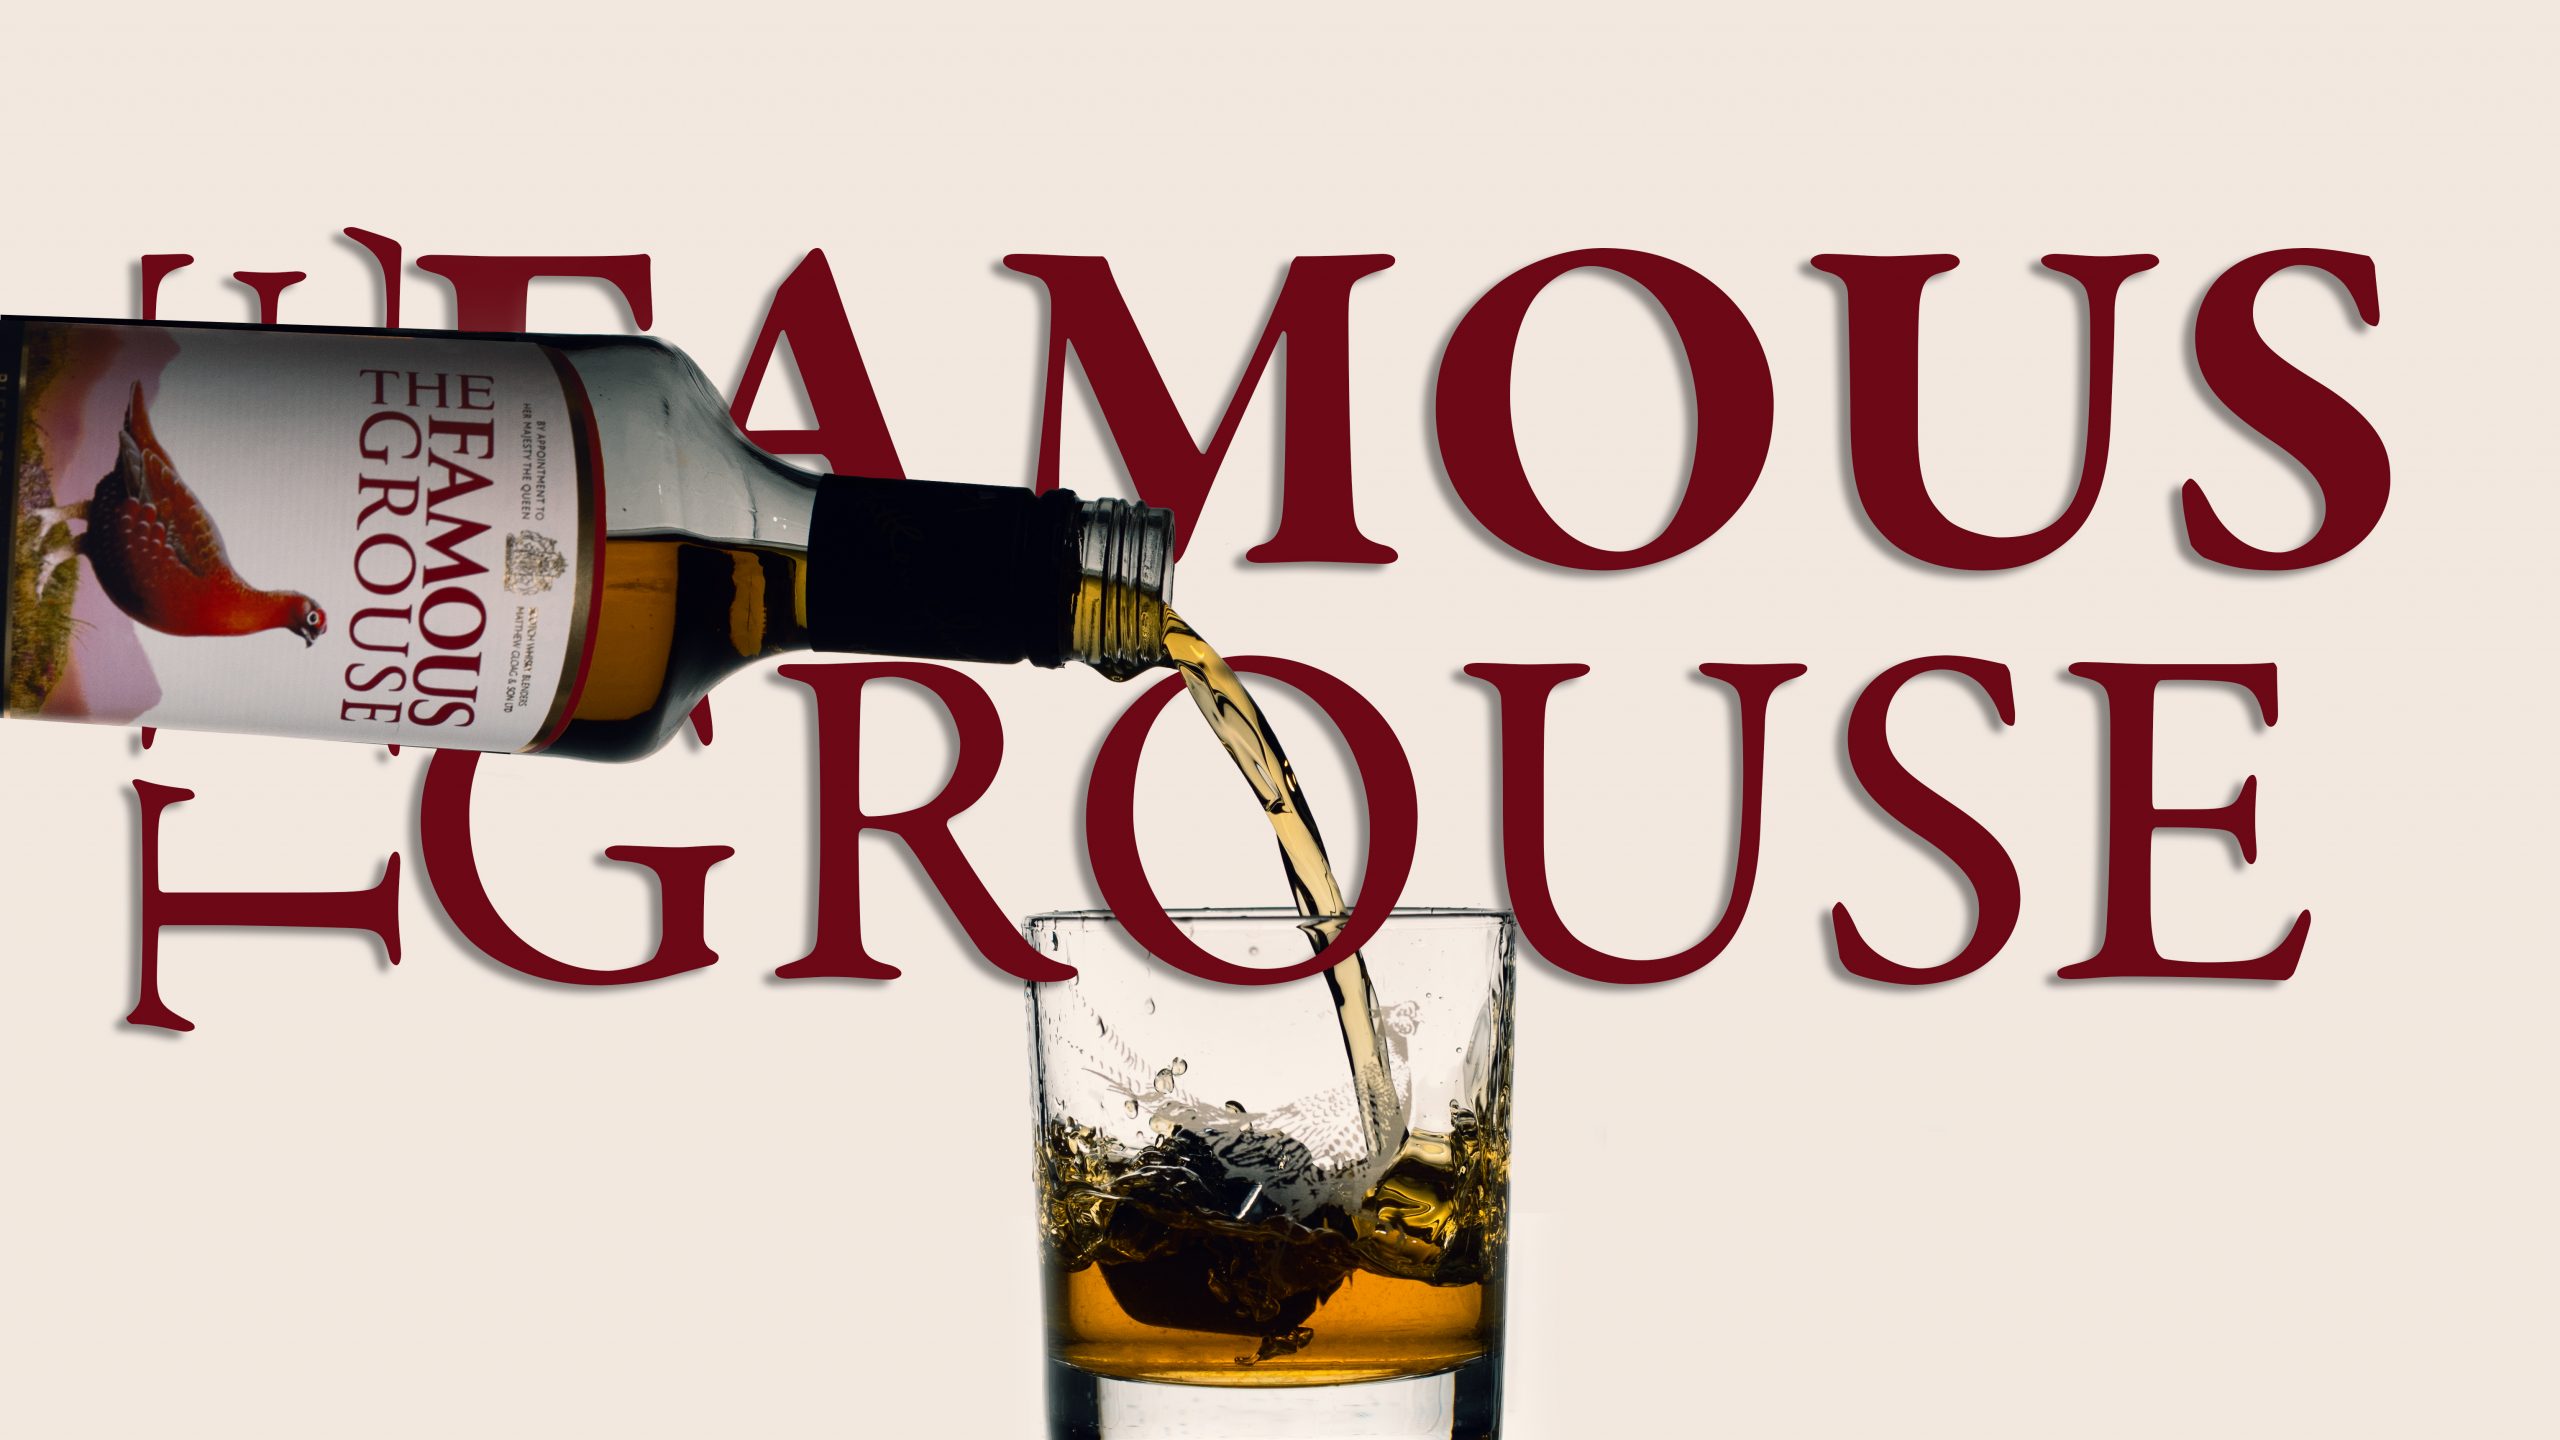 the famouse grouse product promo